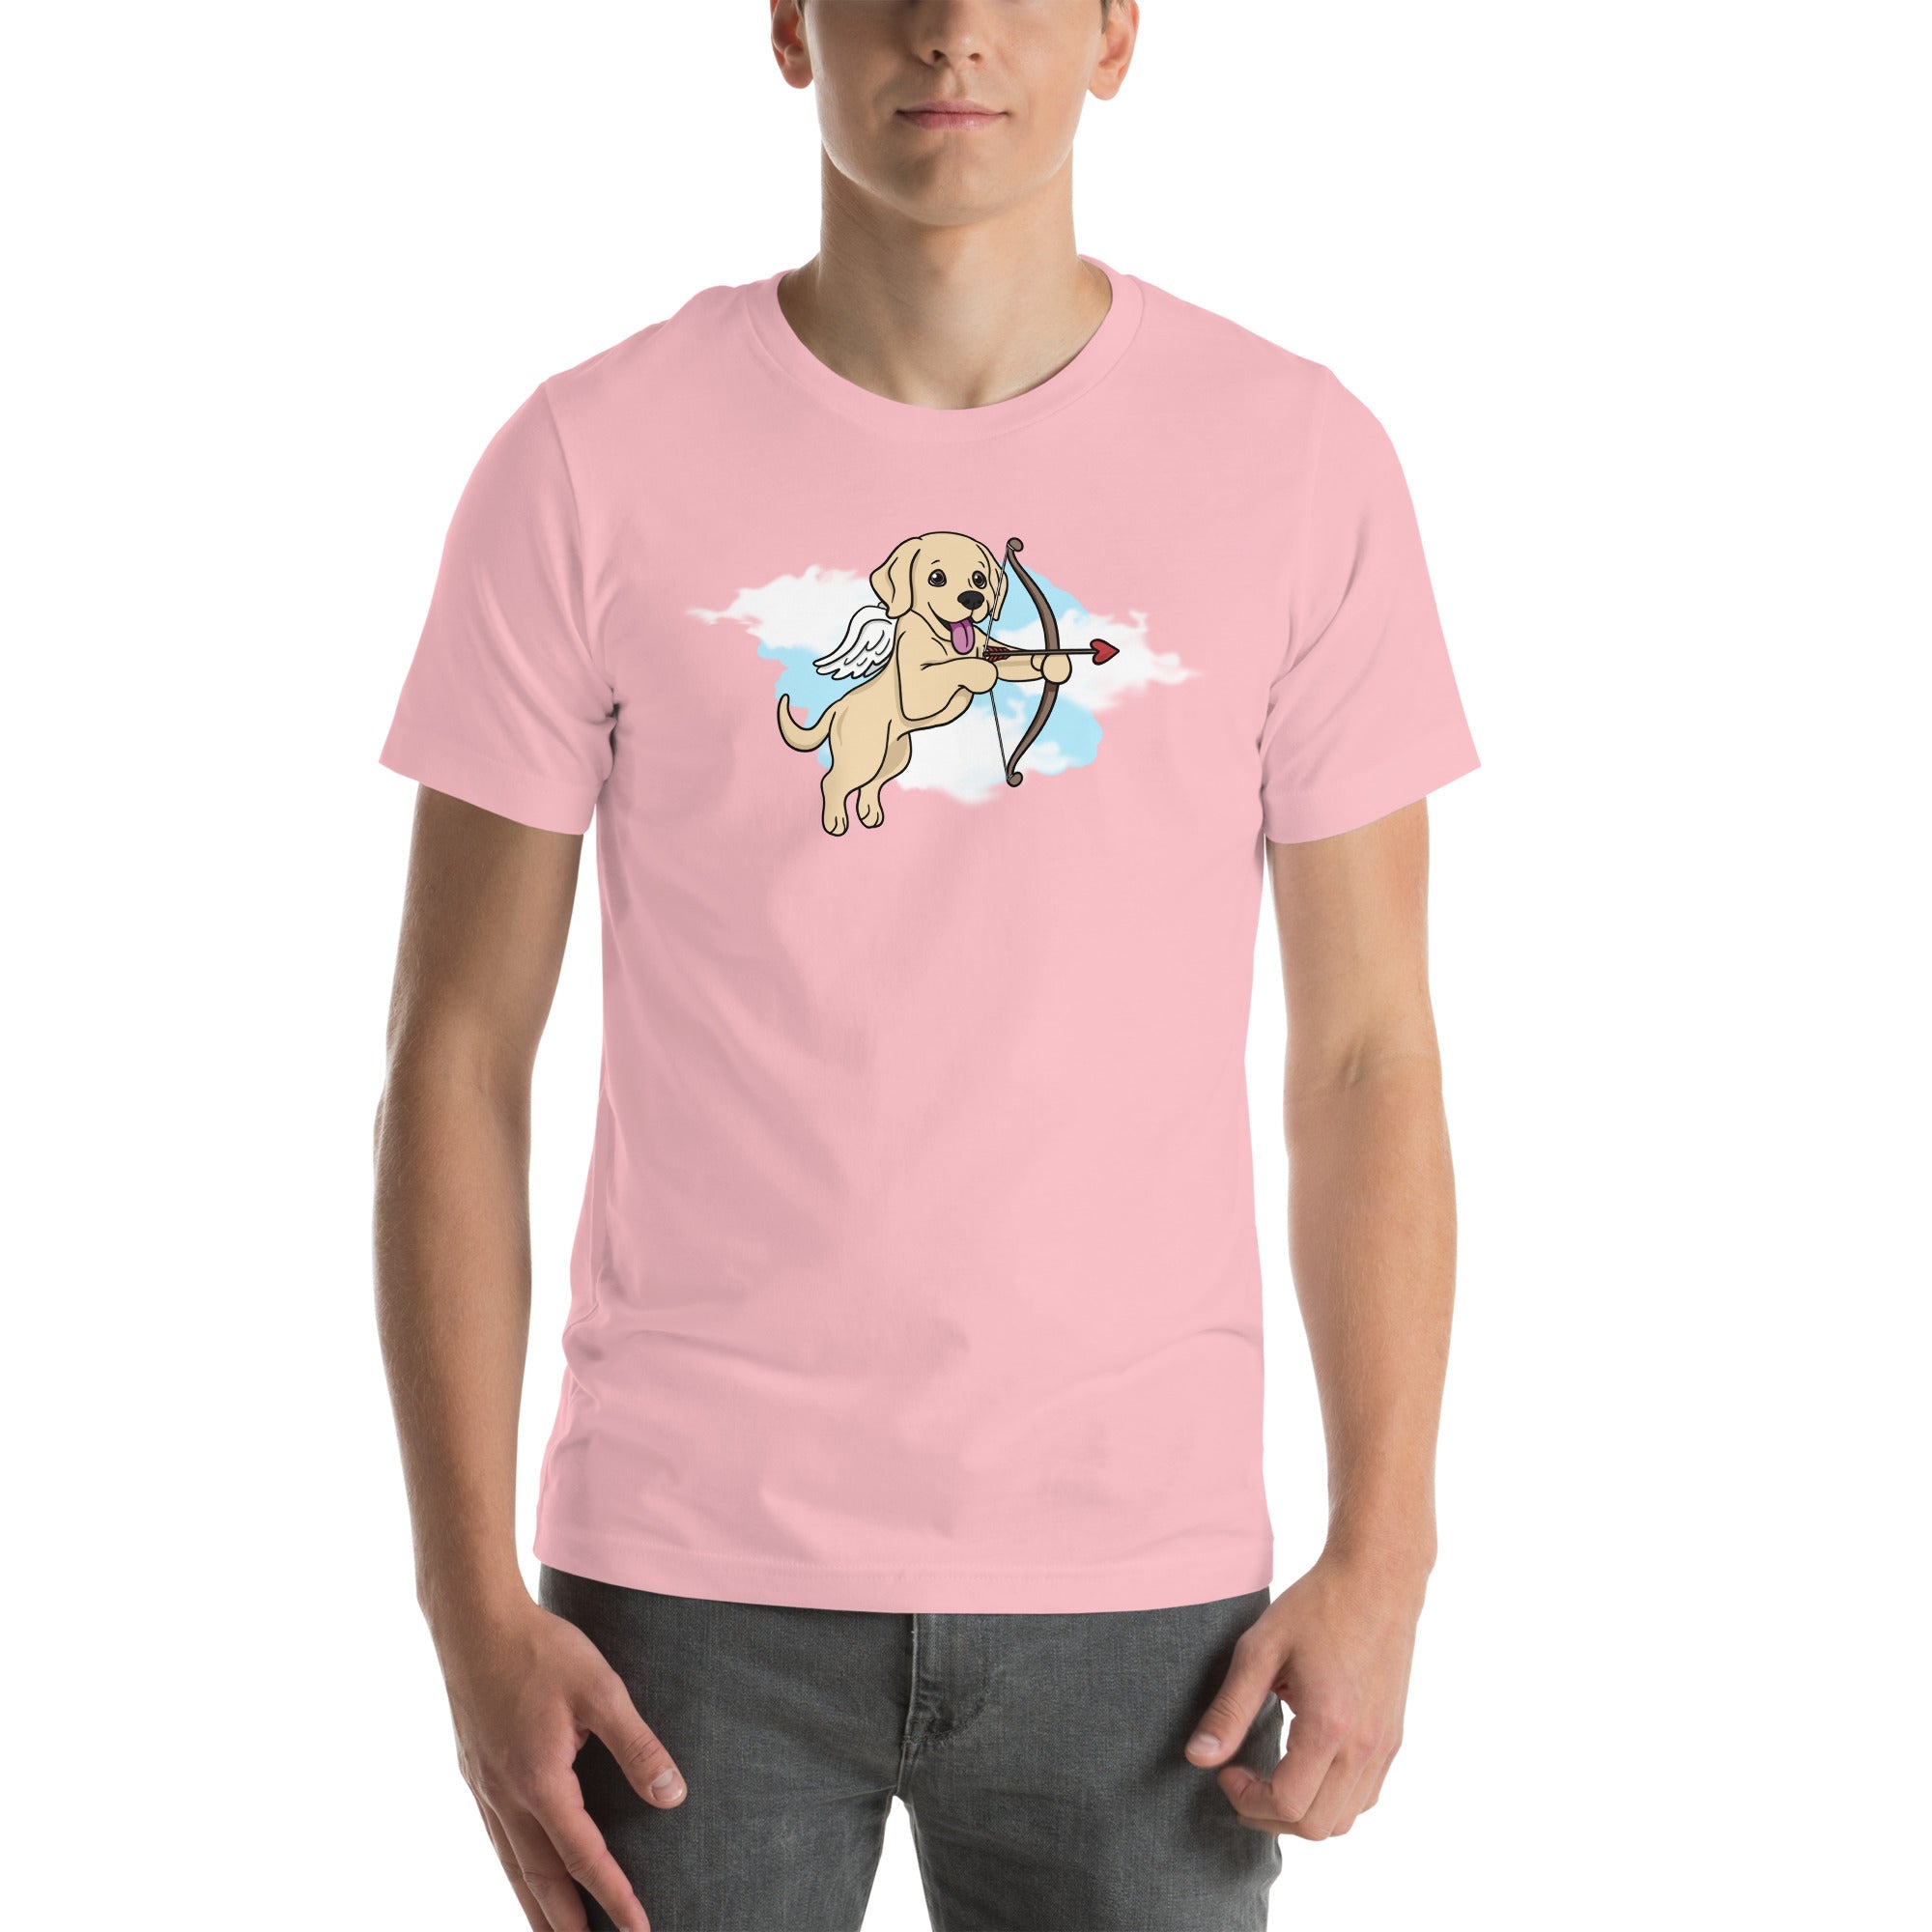 Cupup T-Shirt - TAILWAGS UNLIMITED